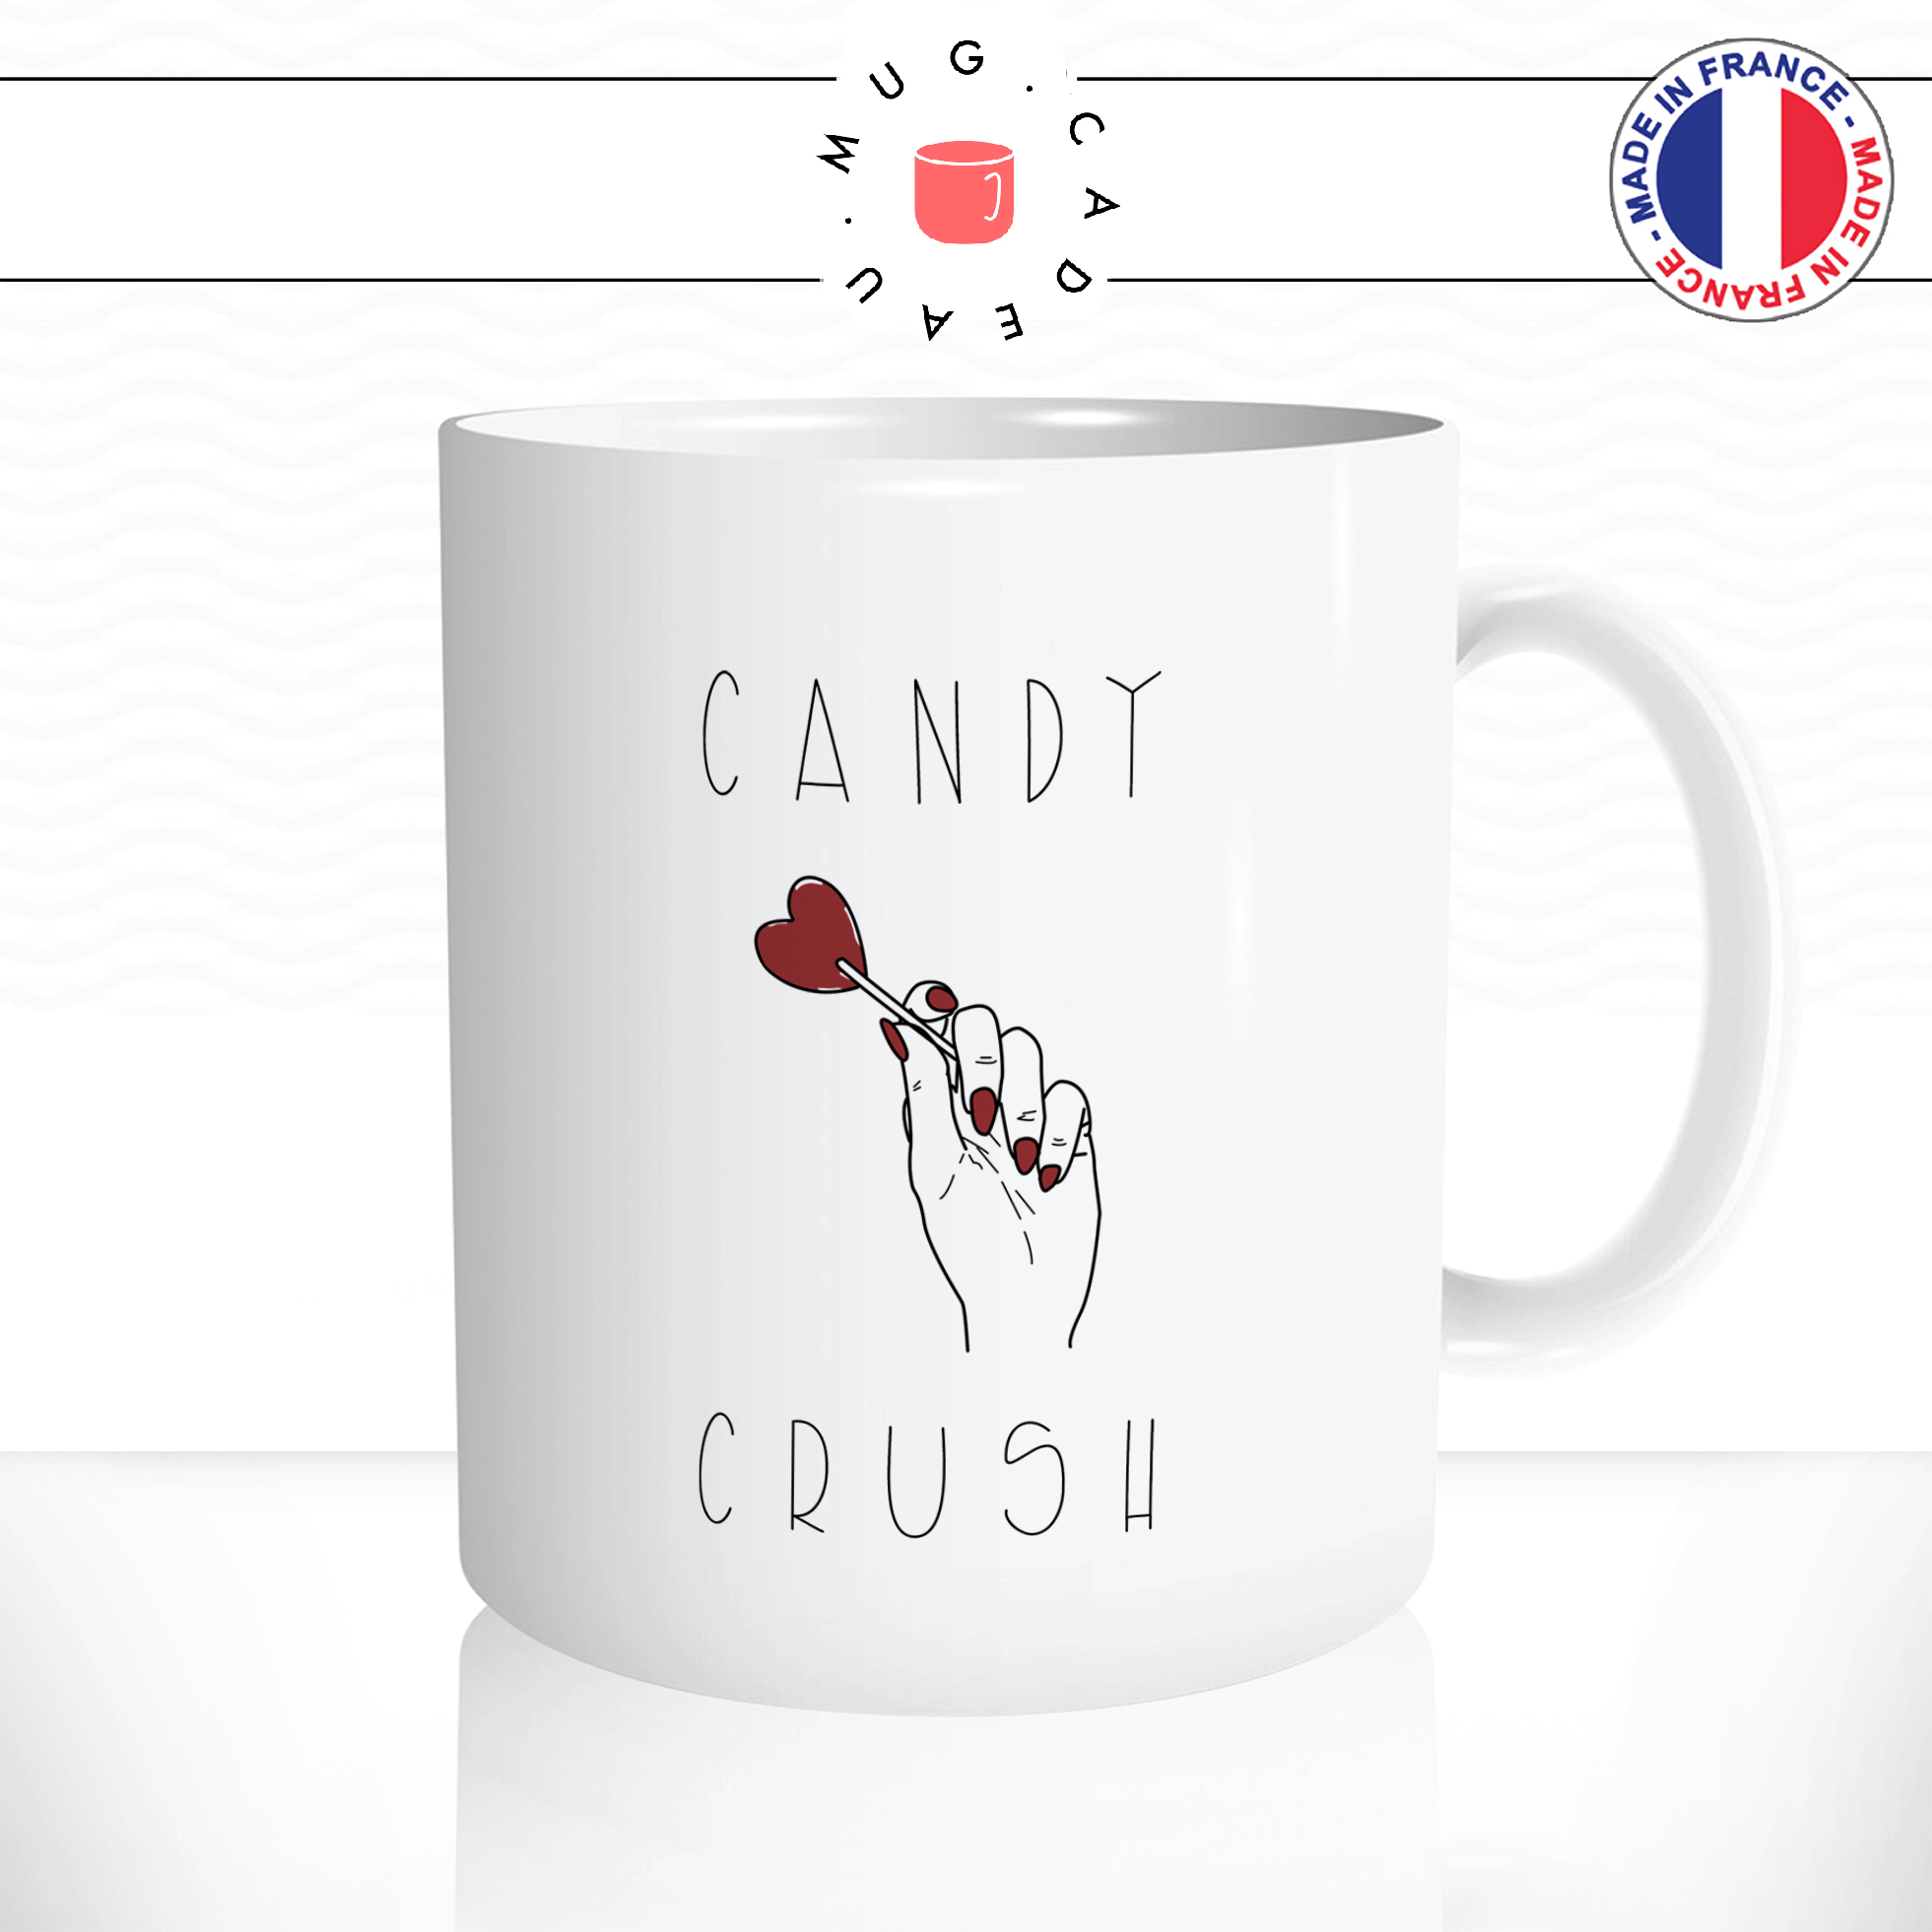 mug-tasse-ref35-mains-sucette-coeur-rouge-vernis-candy-crush-cafe-the-mugs-tasses-personnalise-anse-droite